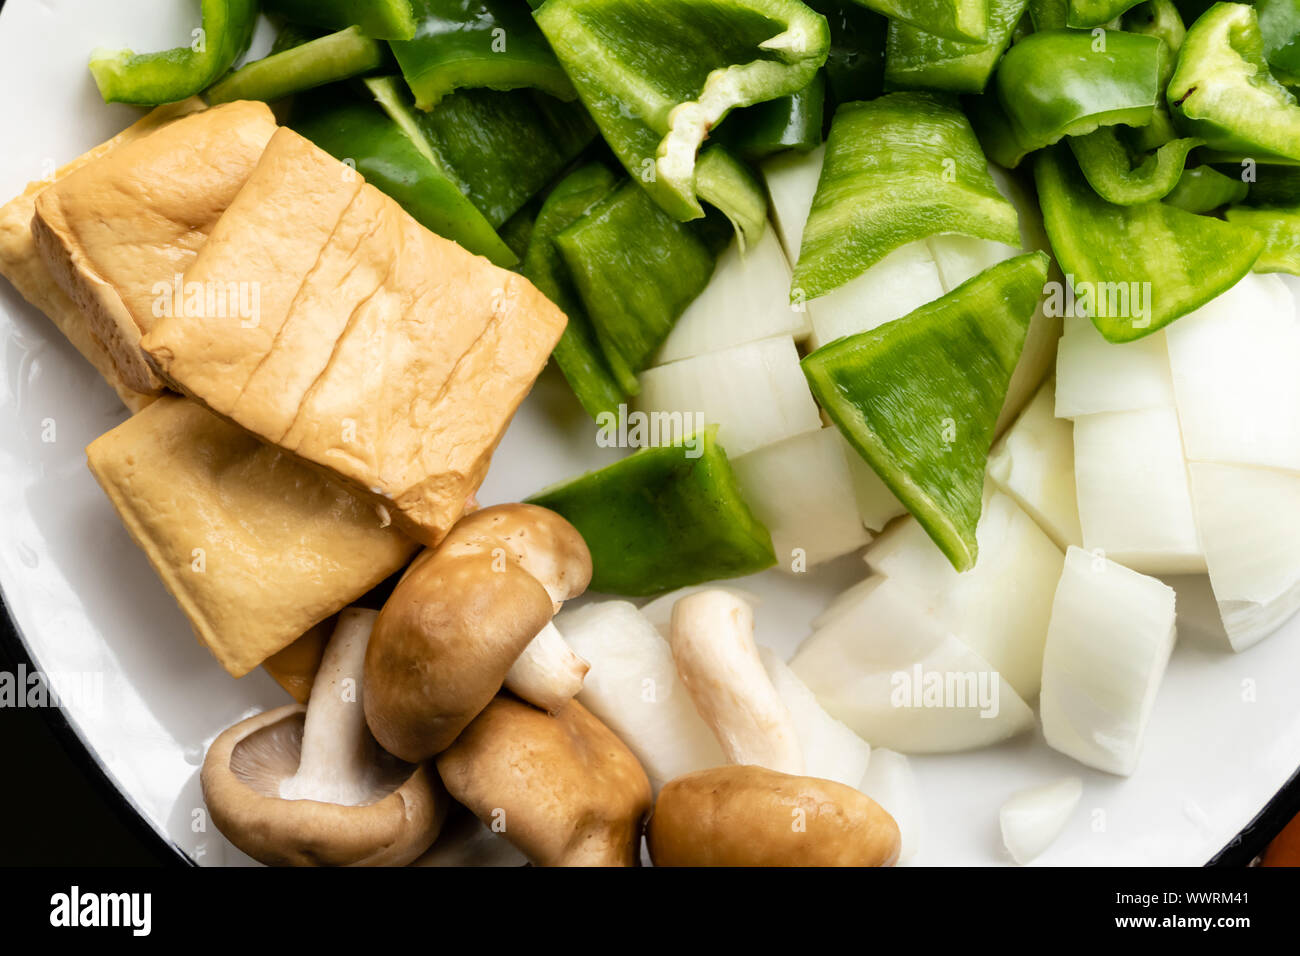 Green peppers, tofu, onion, and mushrooms in plate Stock Photo